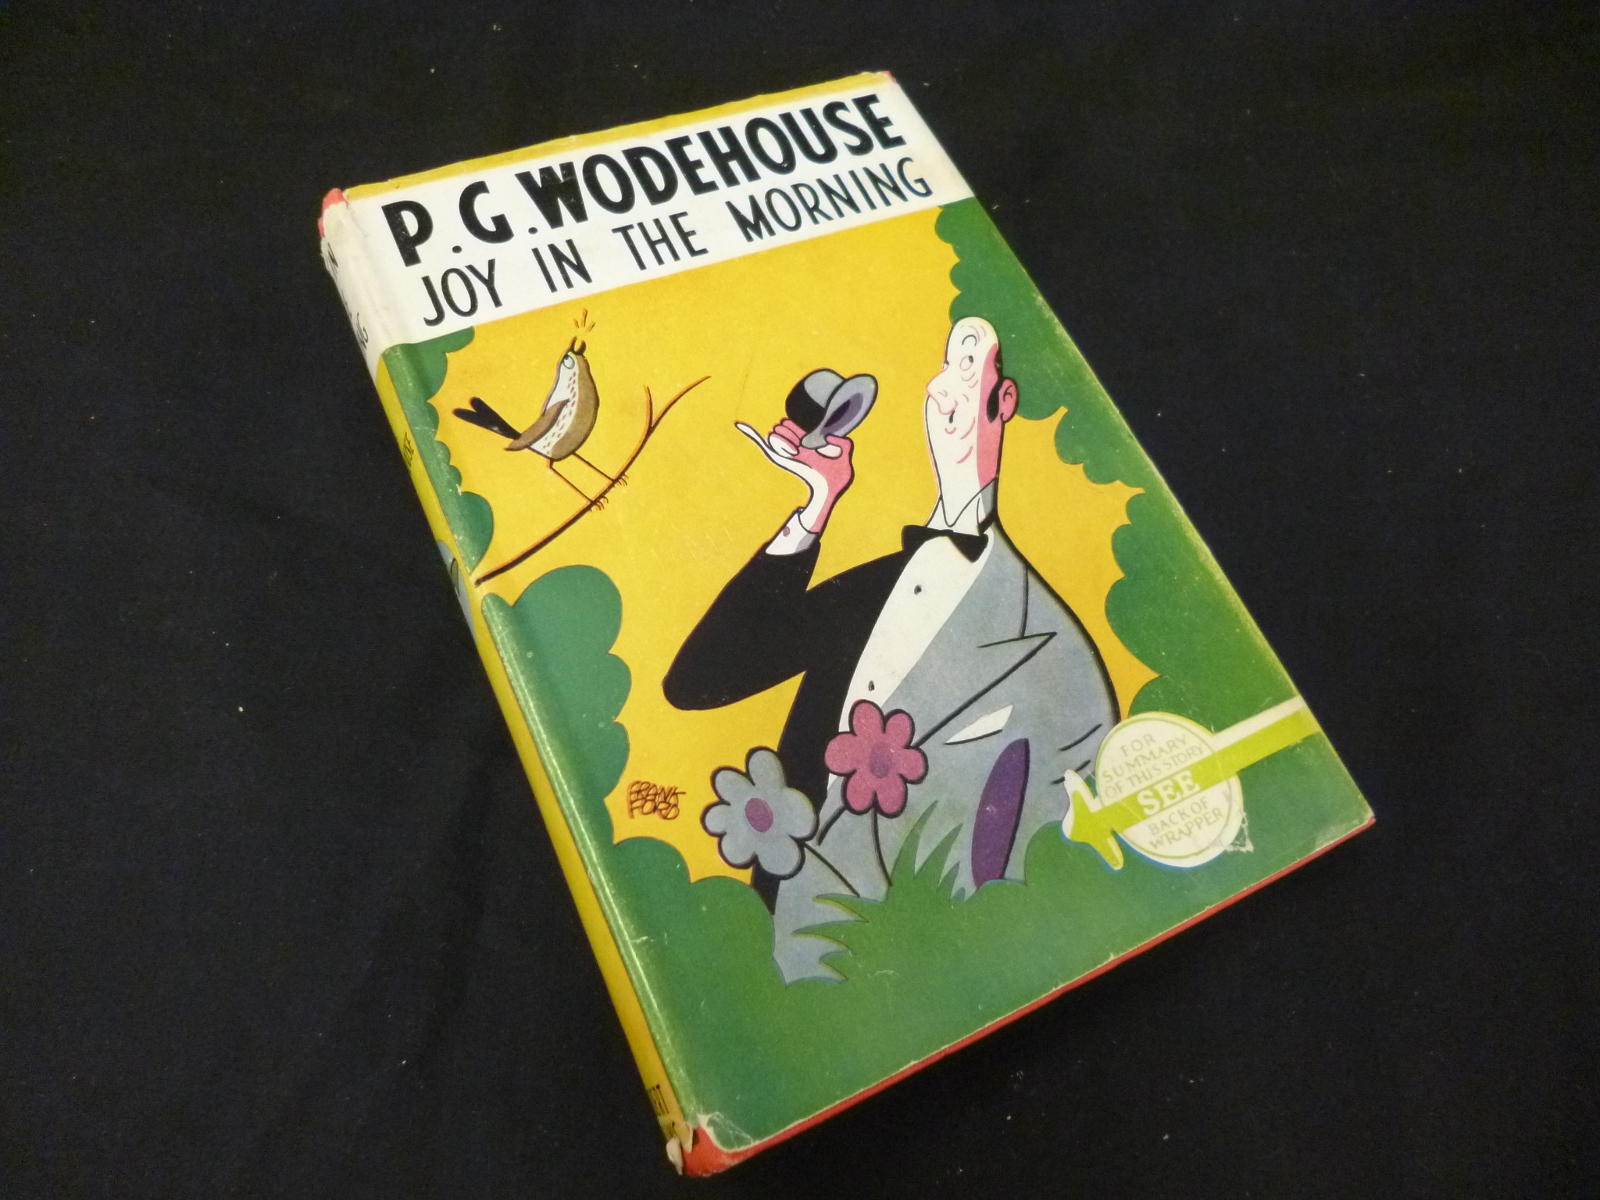 P G WODEHOUSE: JOY IN THE MORNING [1947], 1st edn, orig cl, d/w, (with large closed tear to rear